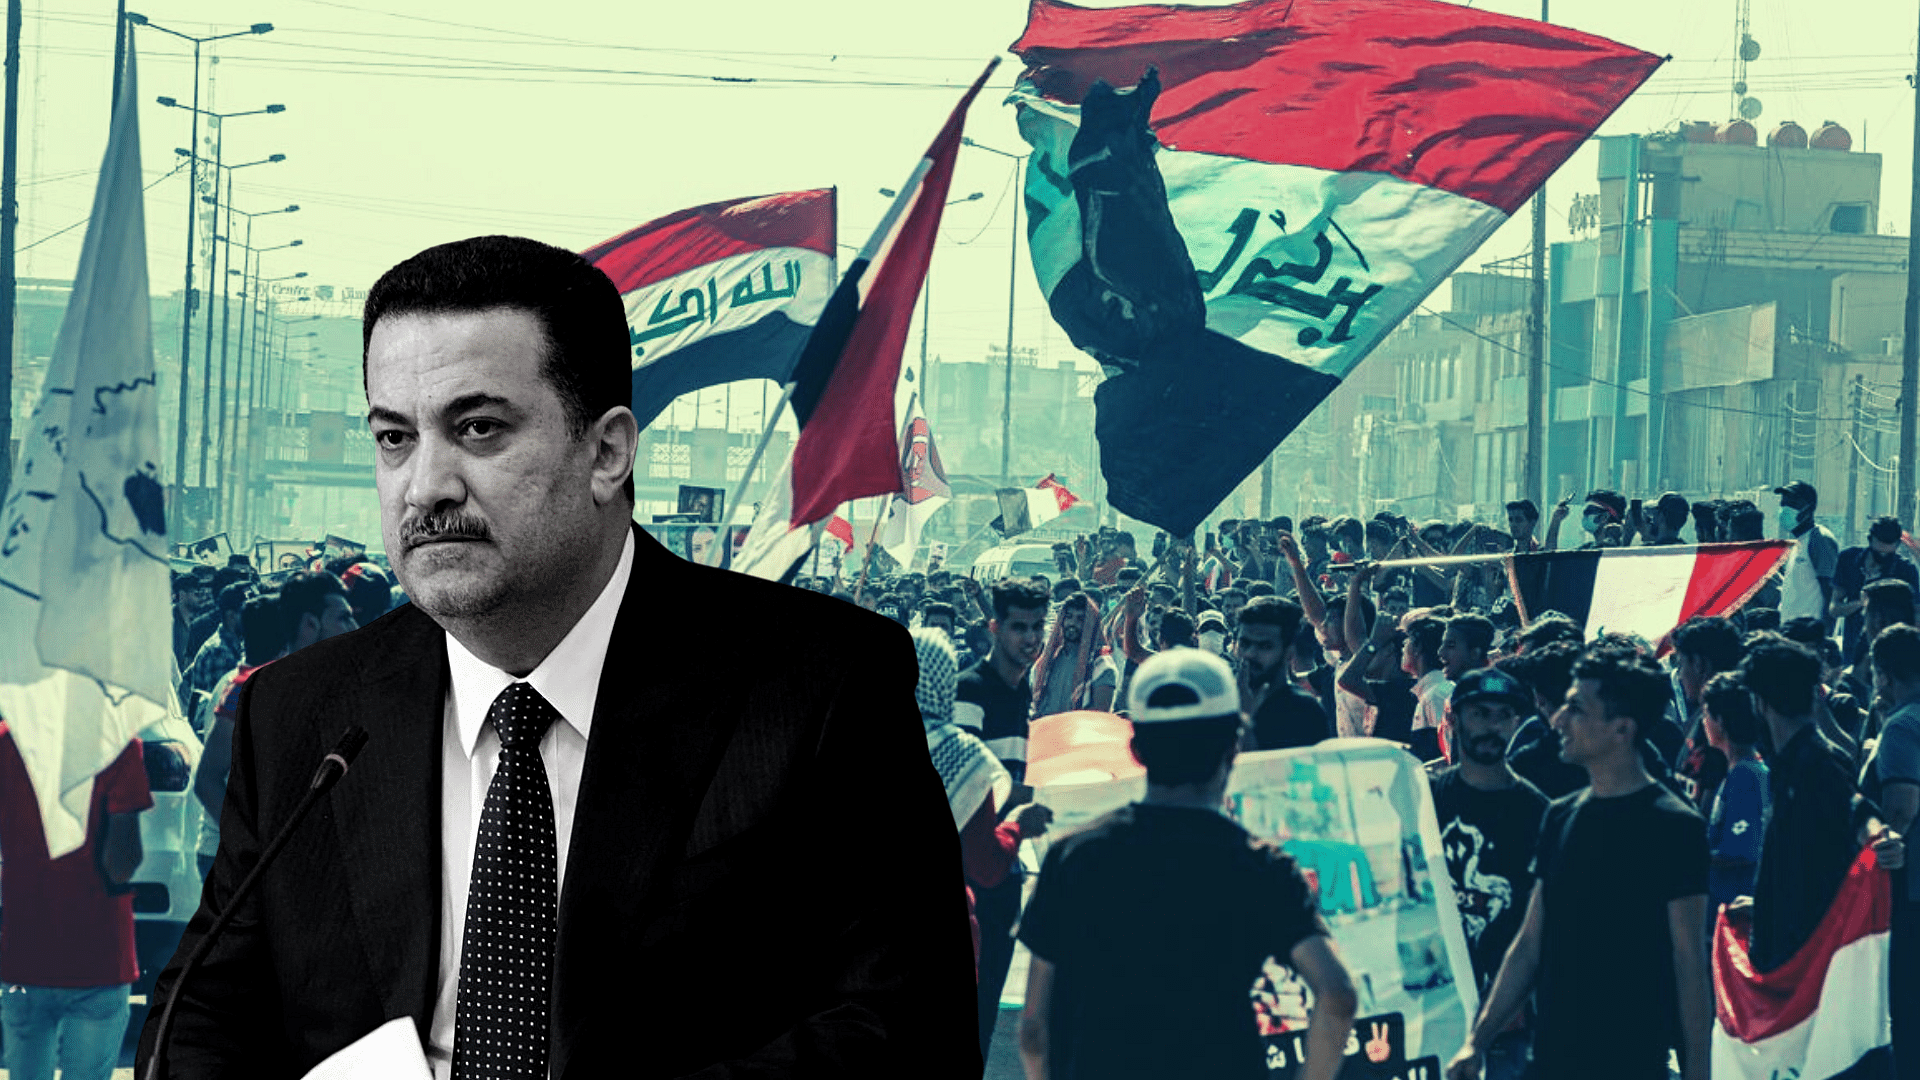 <div class="paragraphs"><p>Iraq’s prime minister, Mohammed <a href="https://www.thequint.com/news/world/in-a-re-run-of-sri-lanka-protestors-storm-presidential-palace-in-iraq-baghdad-take-dips-in-pool">Shia Al Sudani</a> is already reneging on promises he made to secure his governing coalition.</p></div>